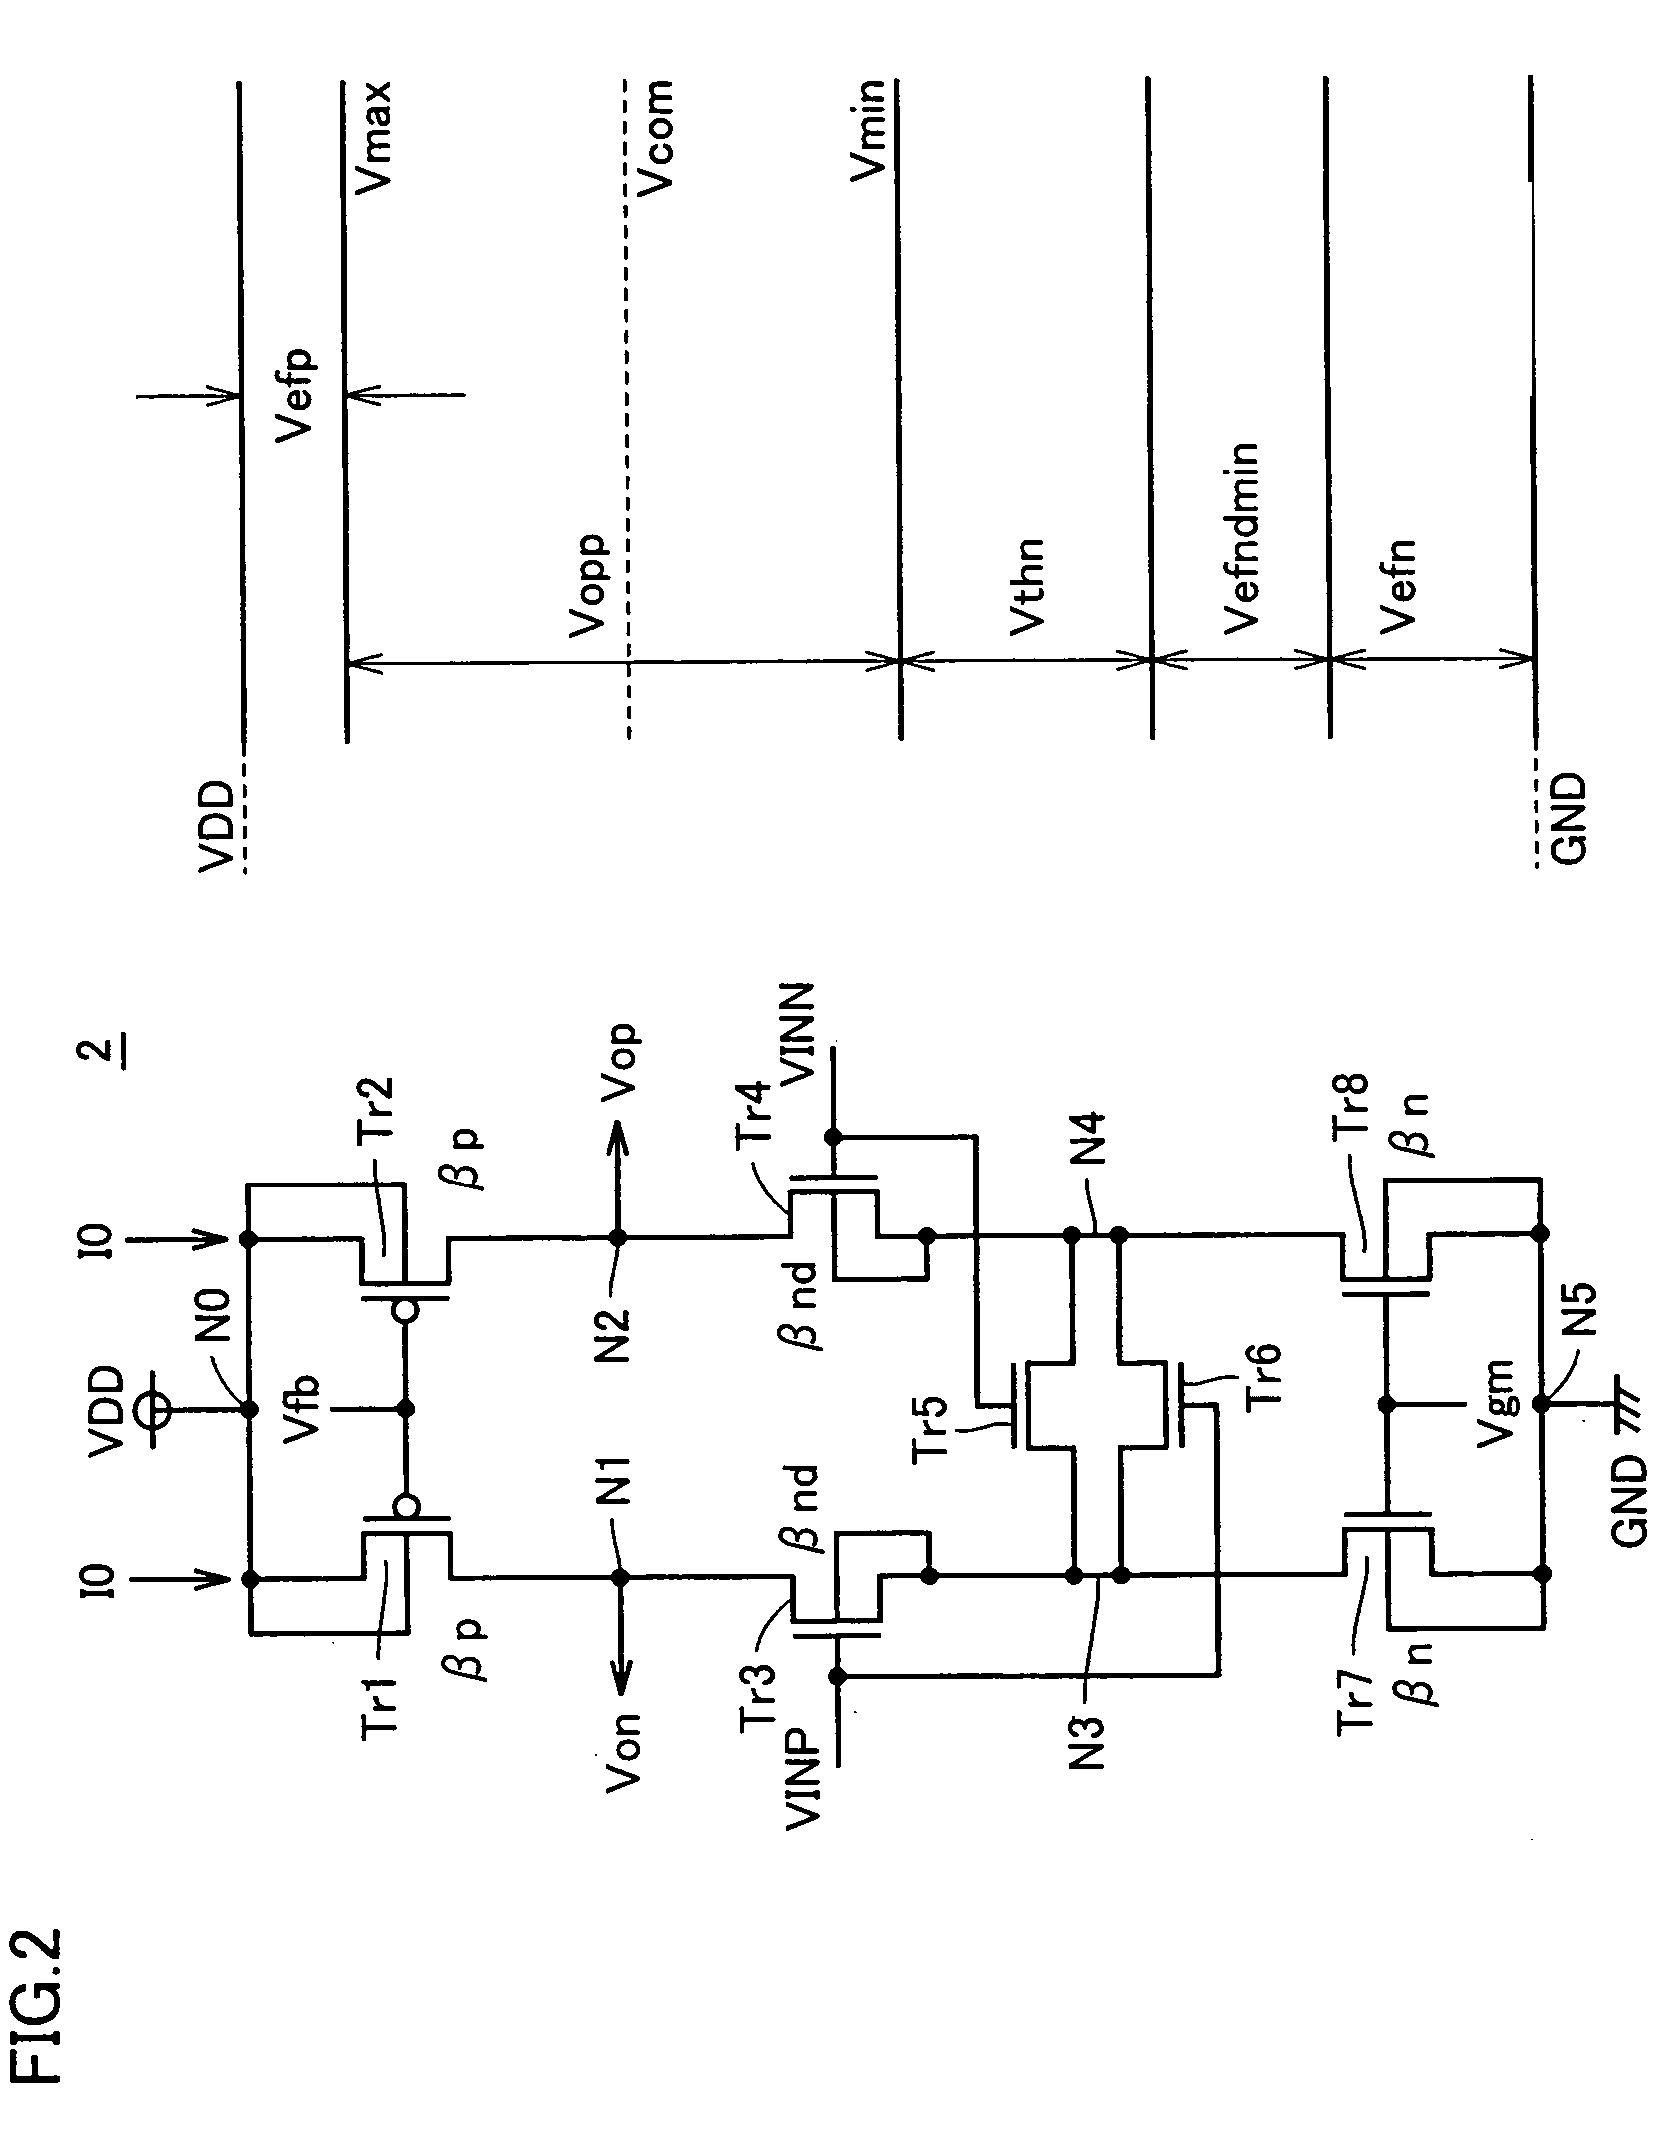 Operational amplifier generating desired feedback reference voltage allowing improved output characteristic